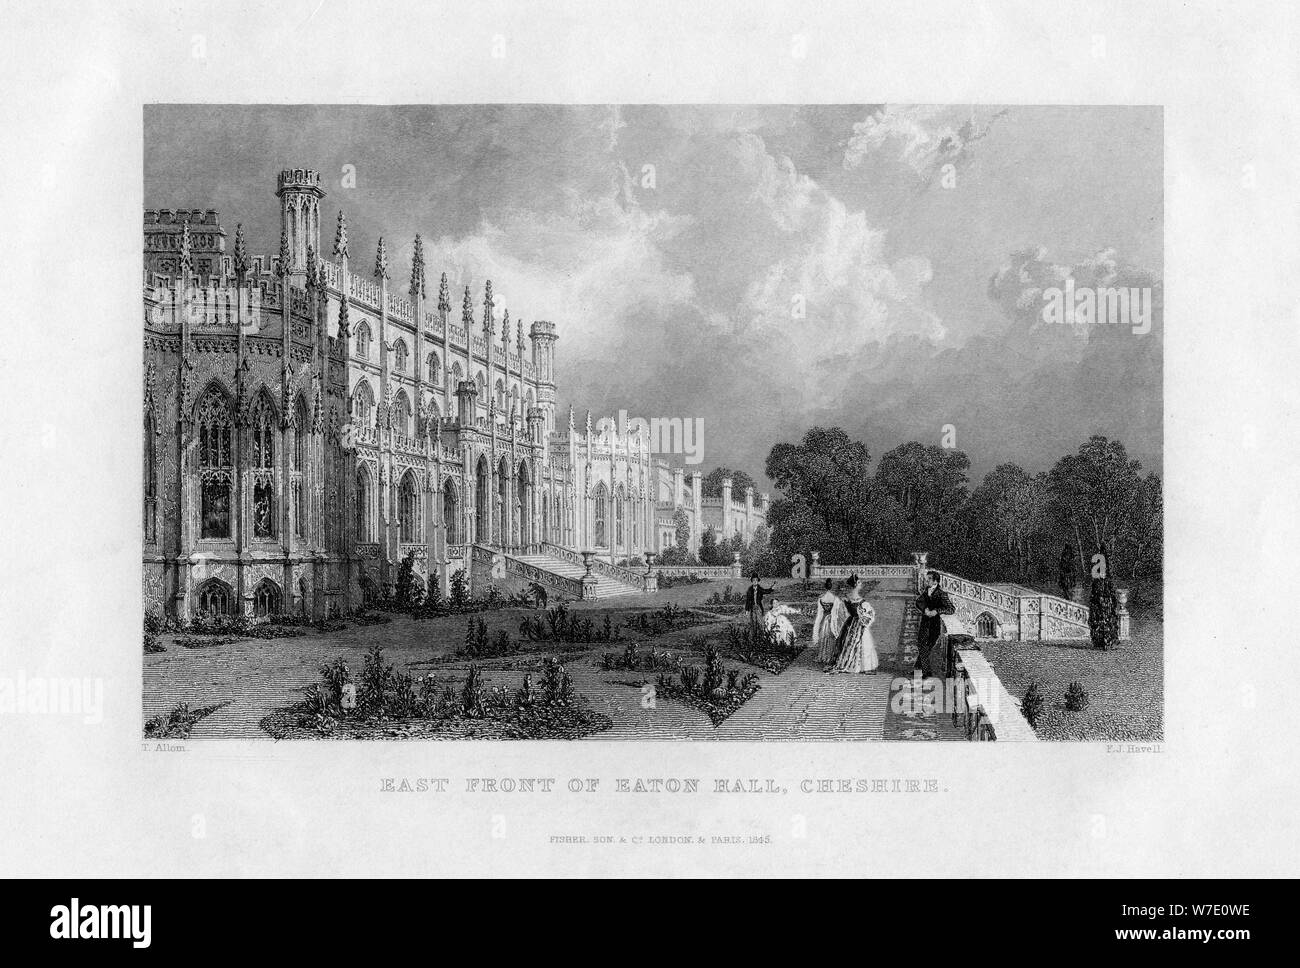 East front de Eaton Hall, Cheshire, 1845. Artiste : Frederick James Havell Banque D'Images